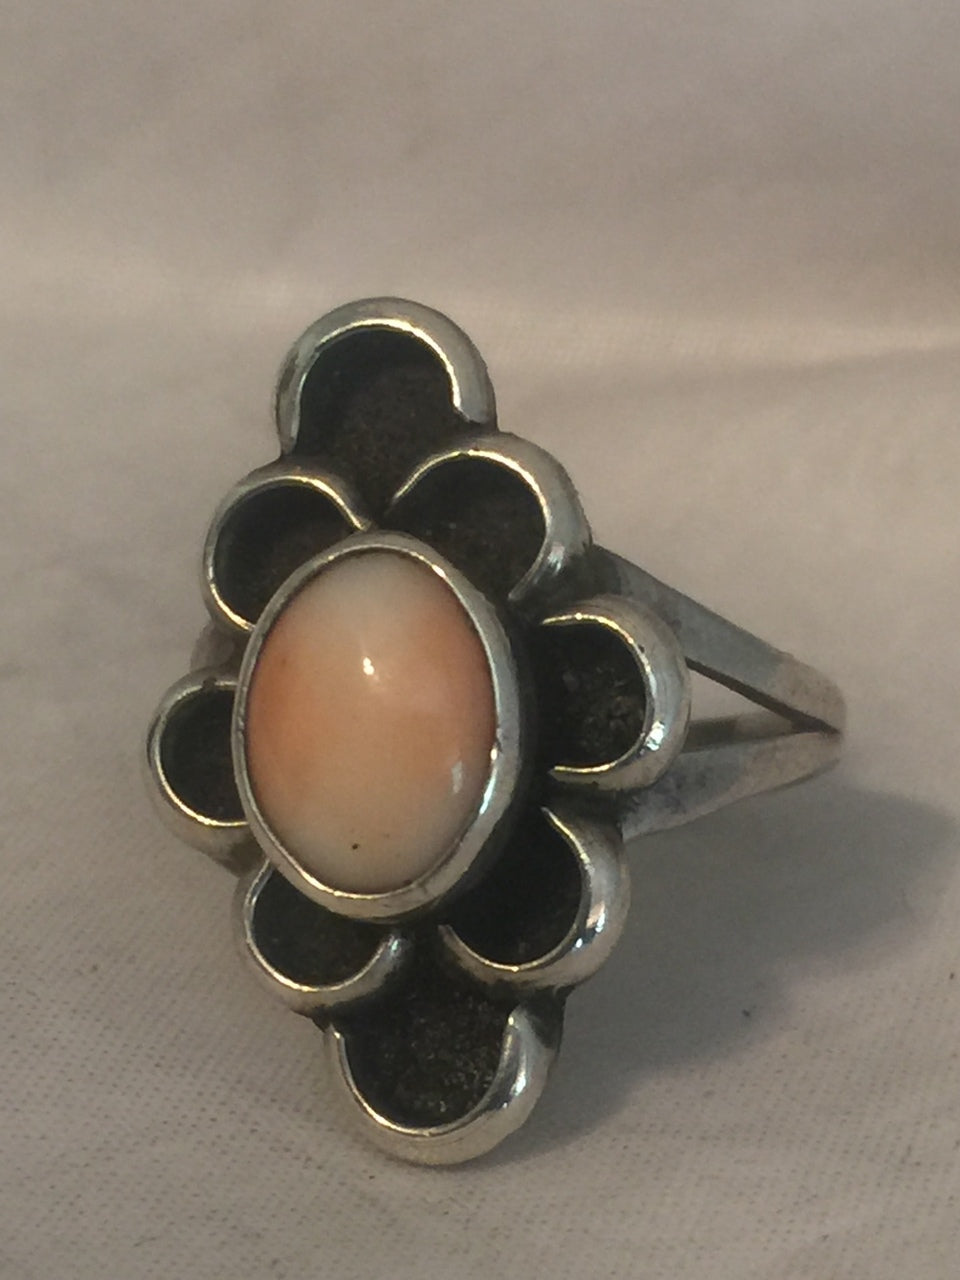 Vintage Sterling Silver Southwest Tribal Mother of Pearl Ring Size  7.5  4.3g